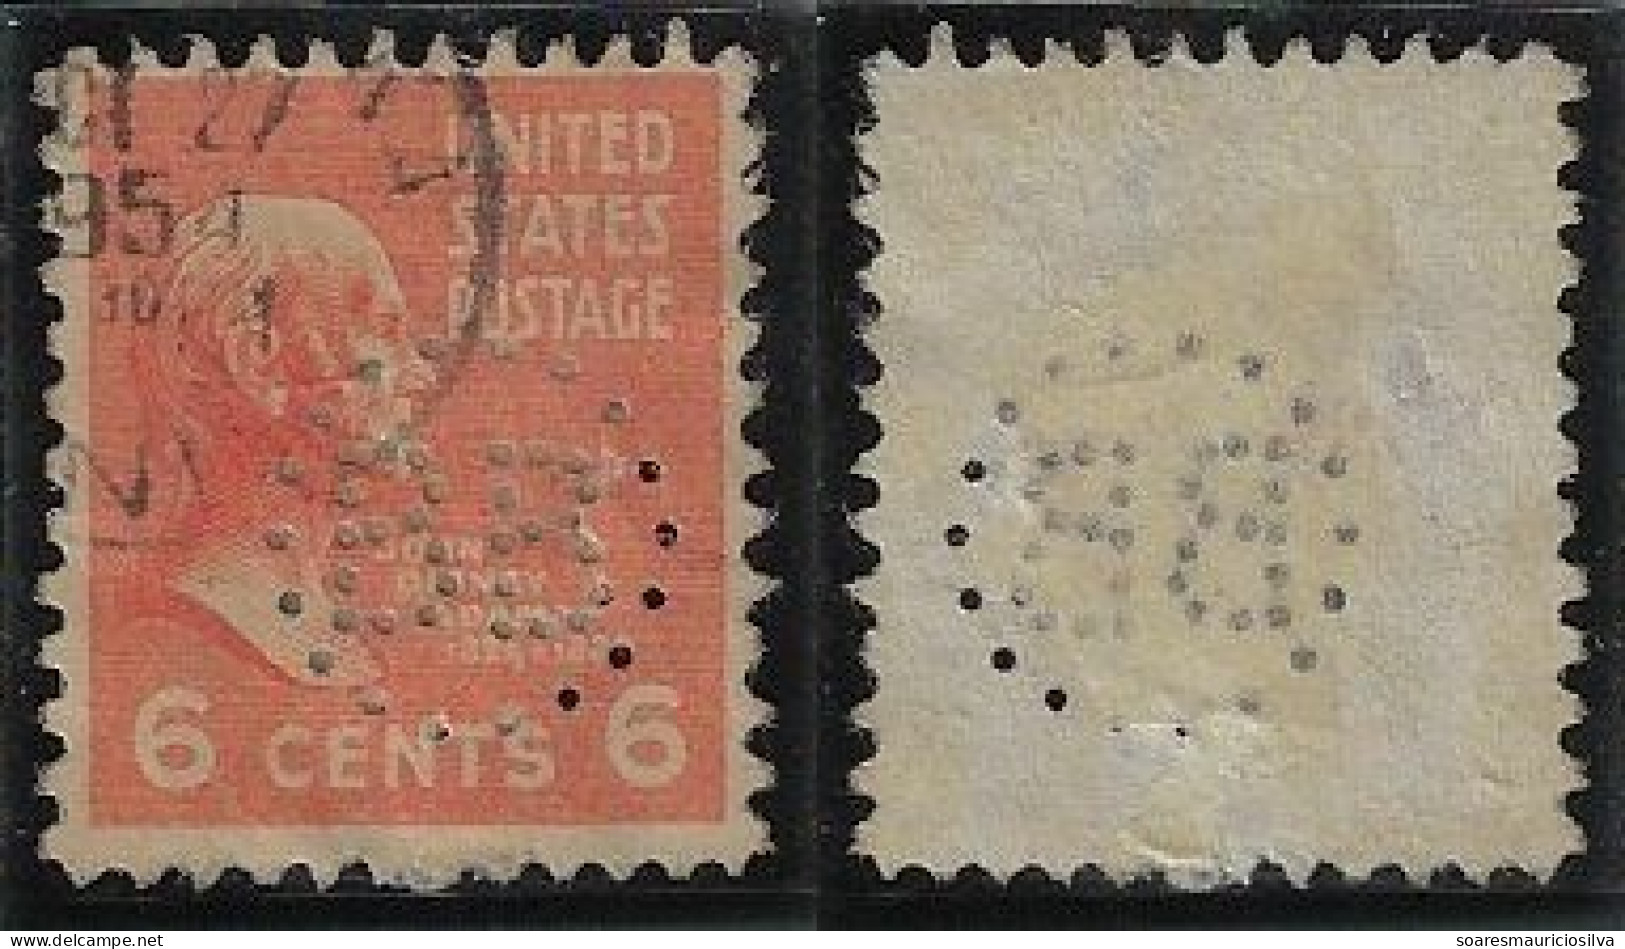 USA United States 1902/1954 Stamp With Perfin BB(Circle) By United States Rubber Company From Mishawaka Lochung Perfore - Perfins